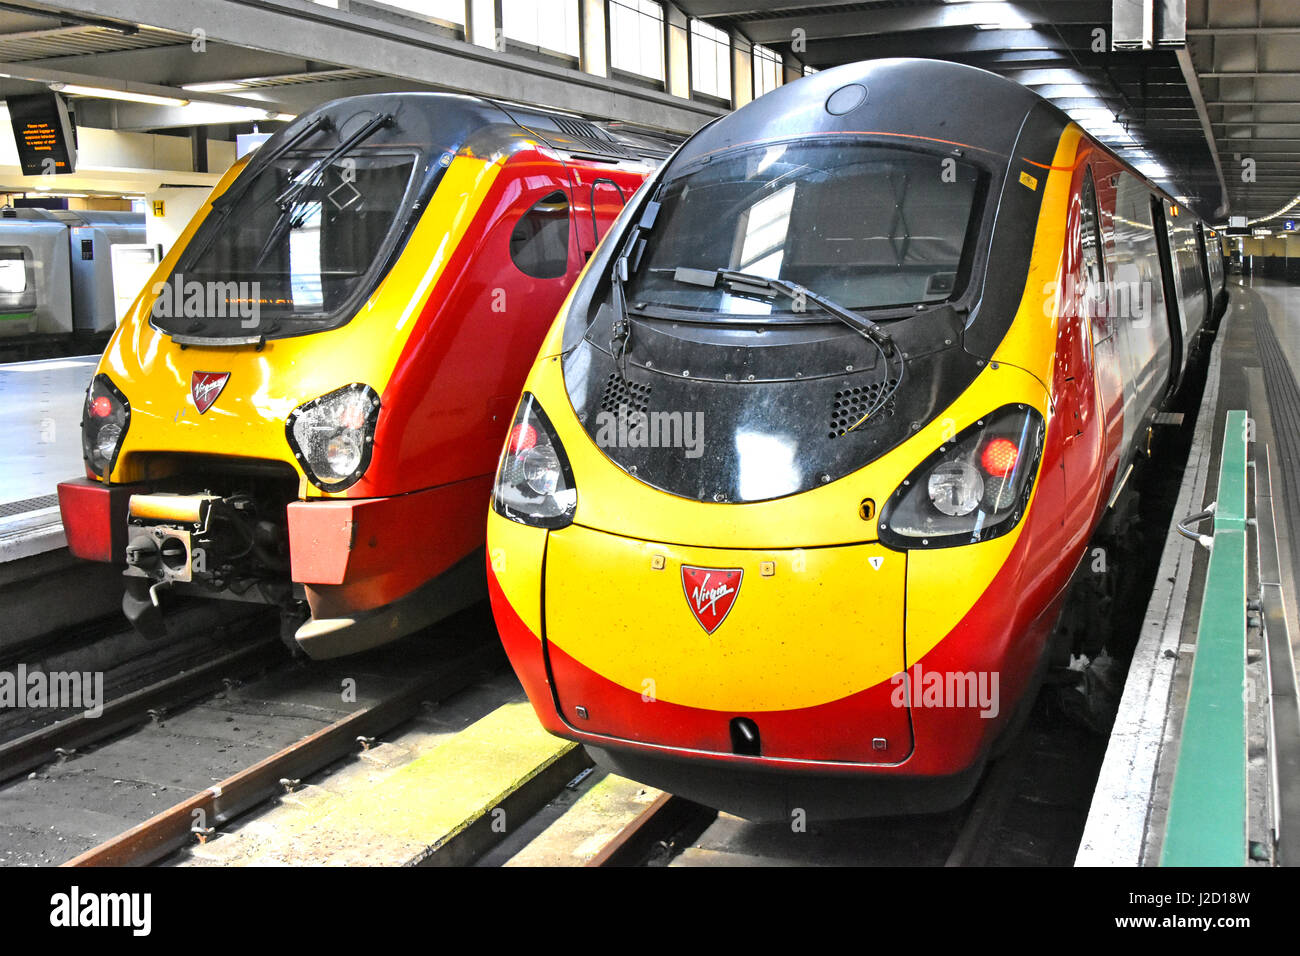 Two streamlined Virgin train units operated by Virgin Trains at Euston railway station platforms London England UK provide inter city public transport Stock Photo